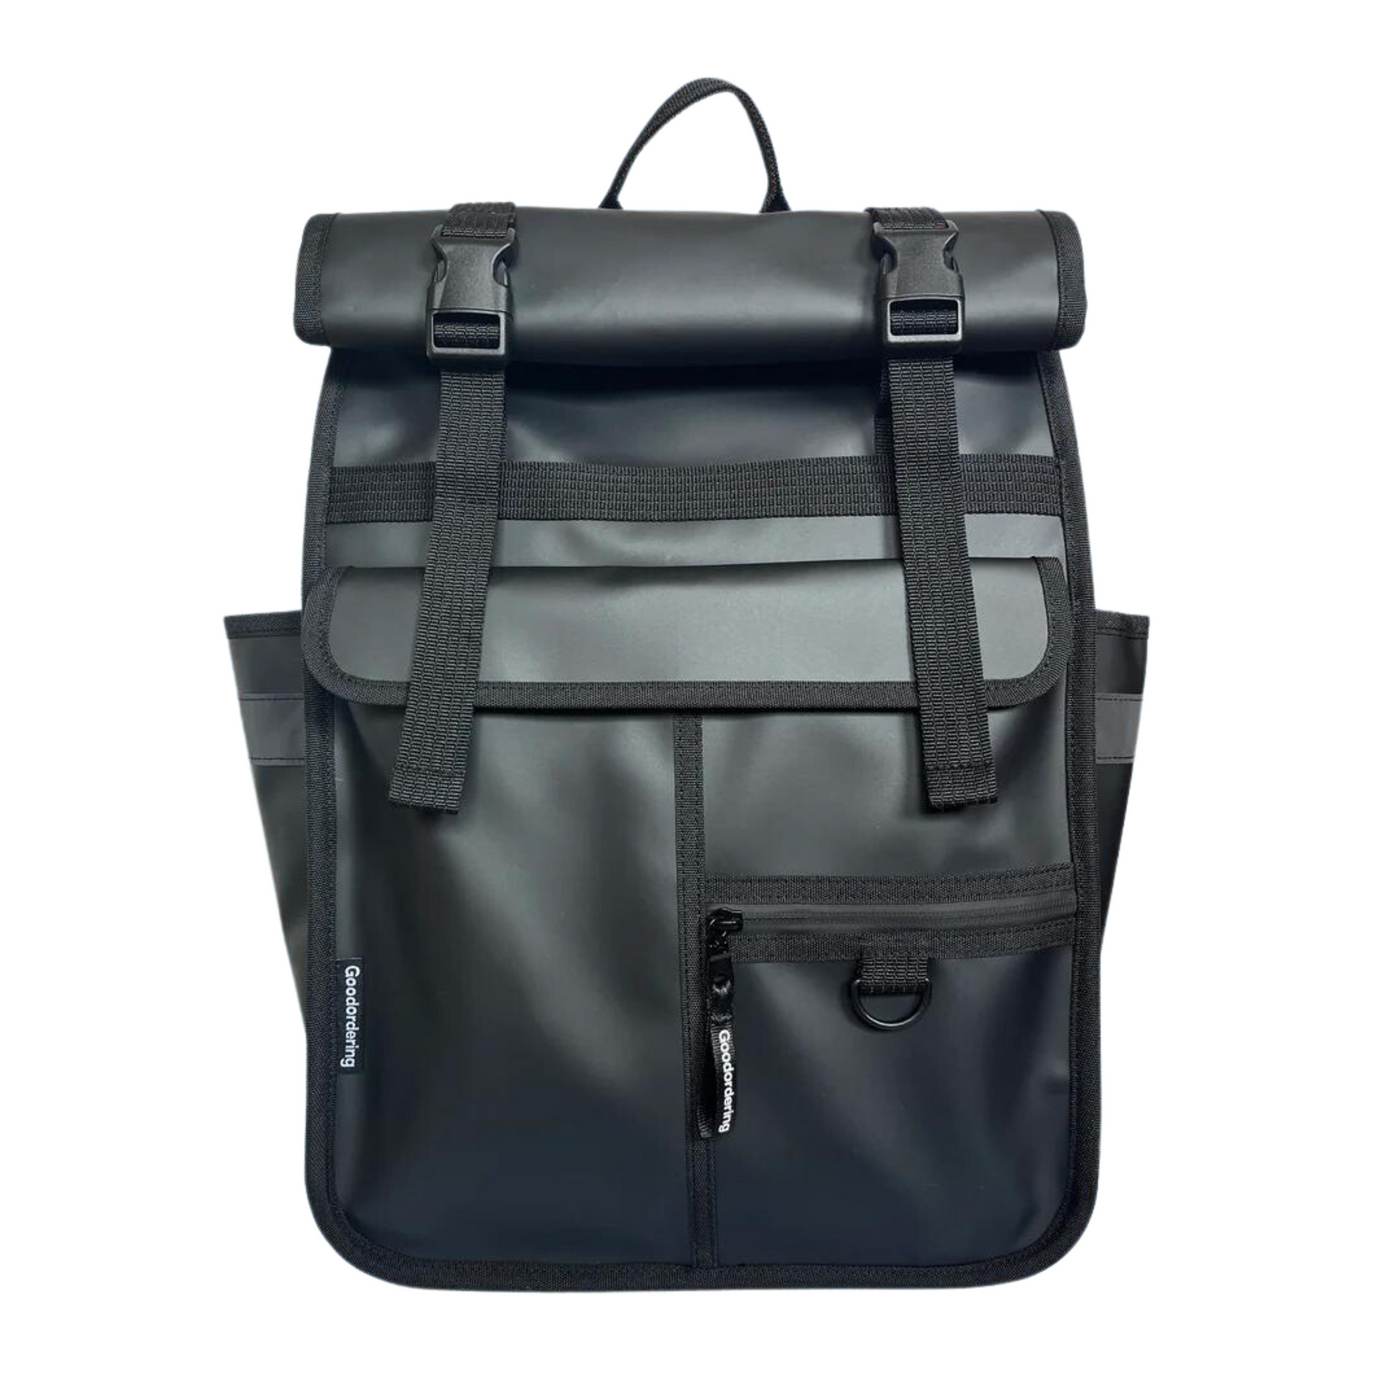 Goodordering Eco Monochrome Rolltop Backpack Pannier Black - Radical Giving